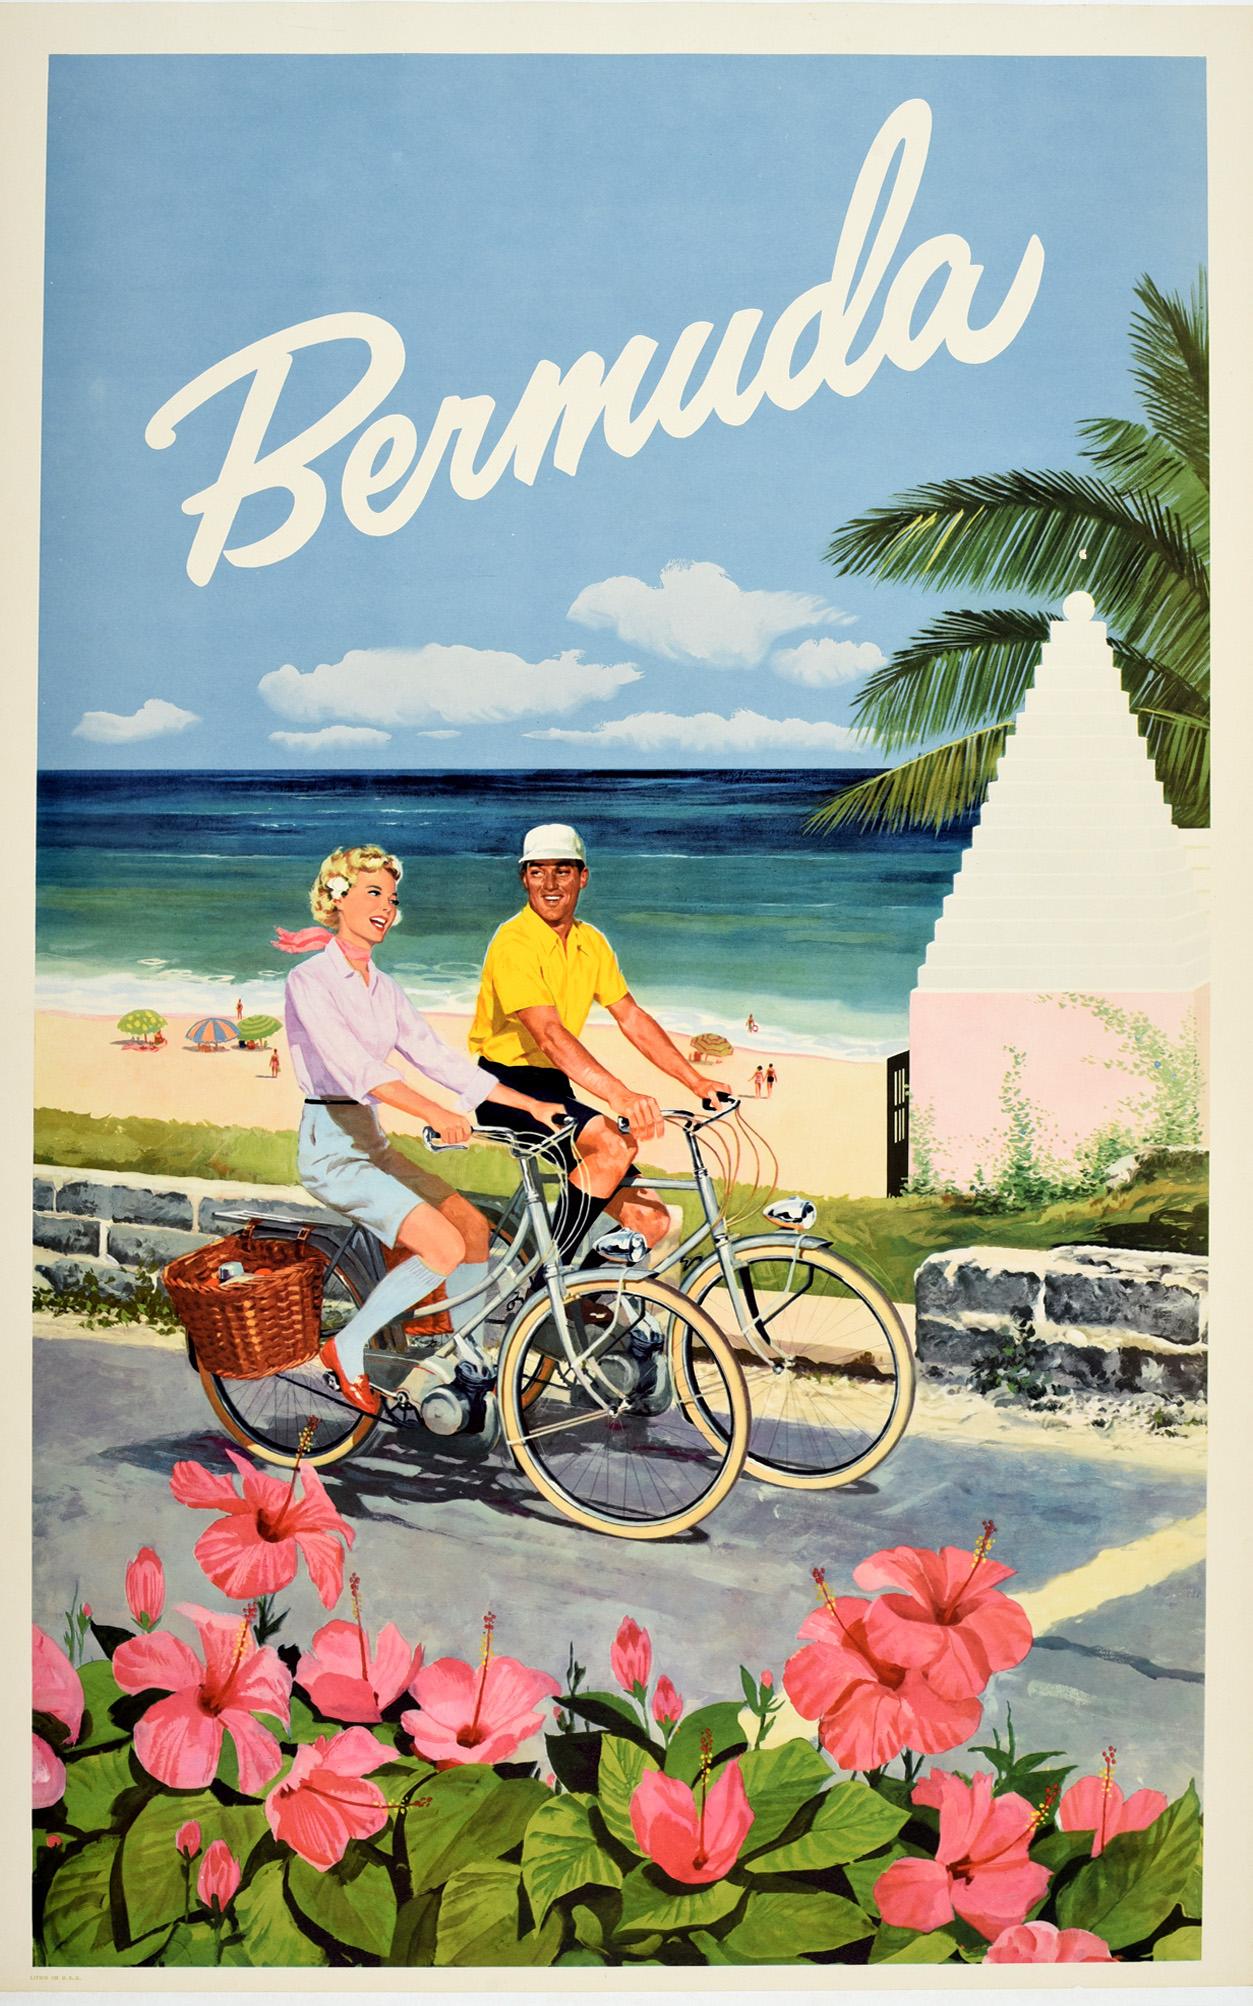 Unknown Print - Original Vintage Travel Poster For Bermuda Ft. Flowers Cycling Sandy Beach View